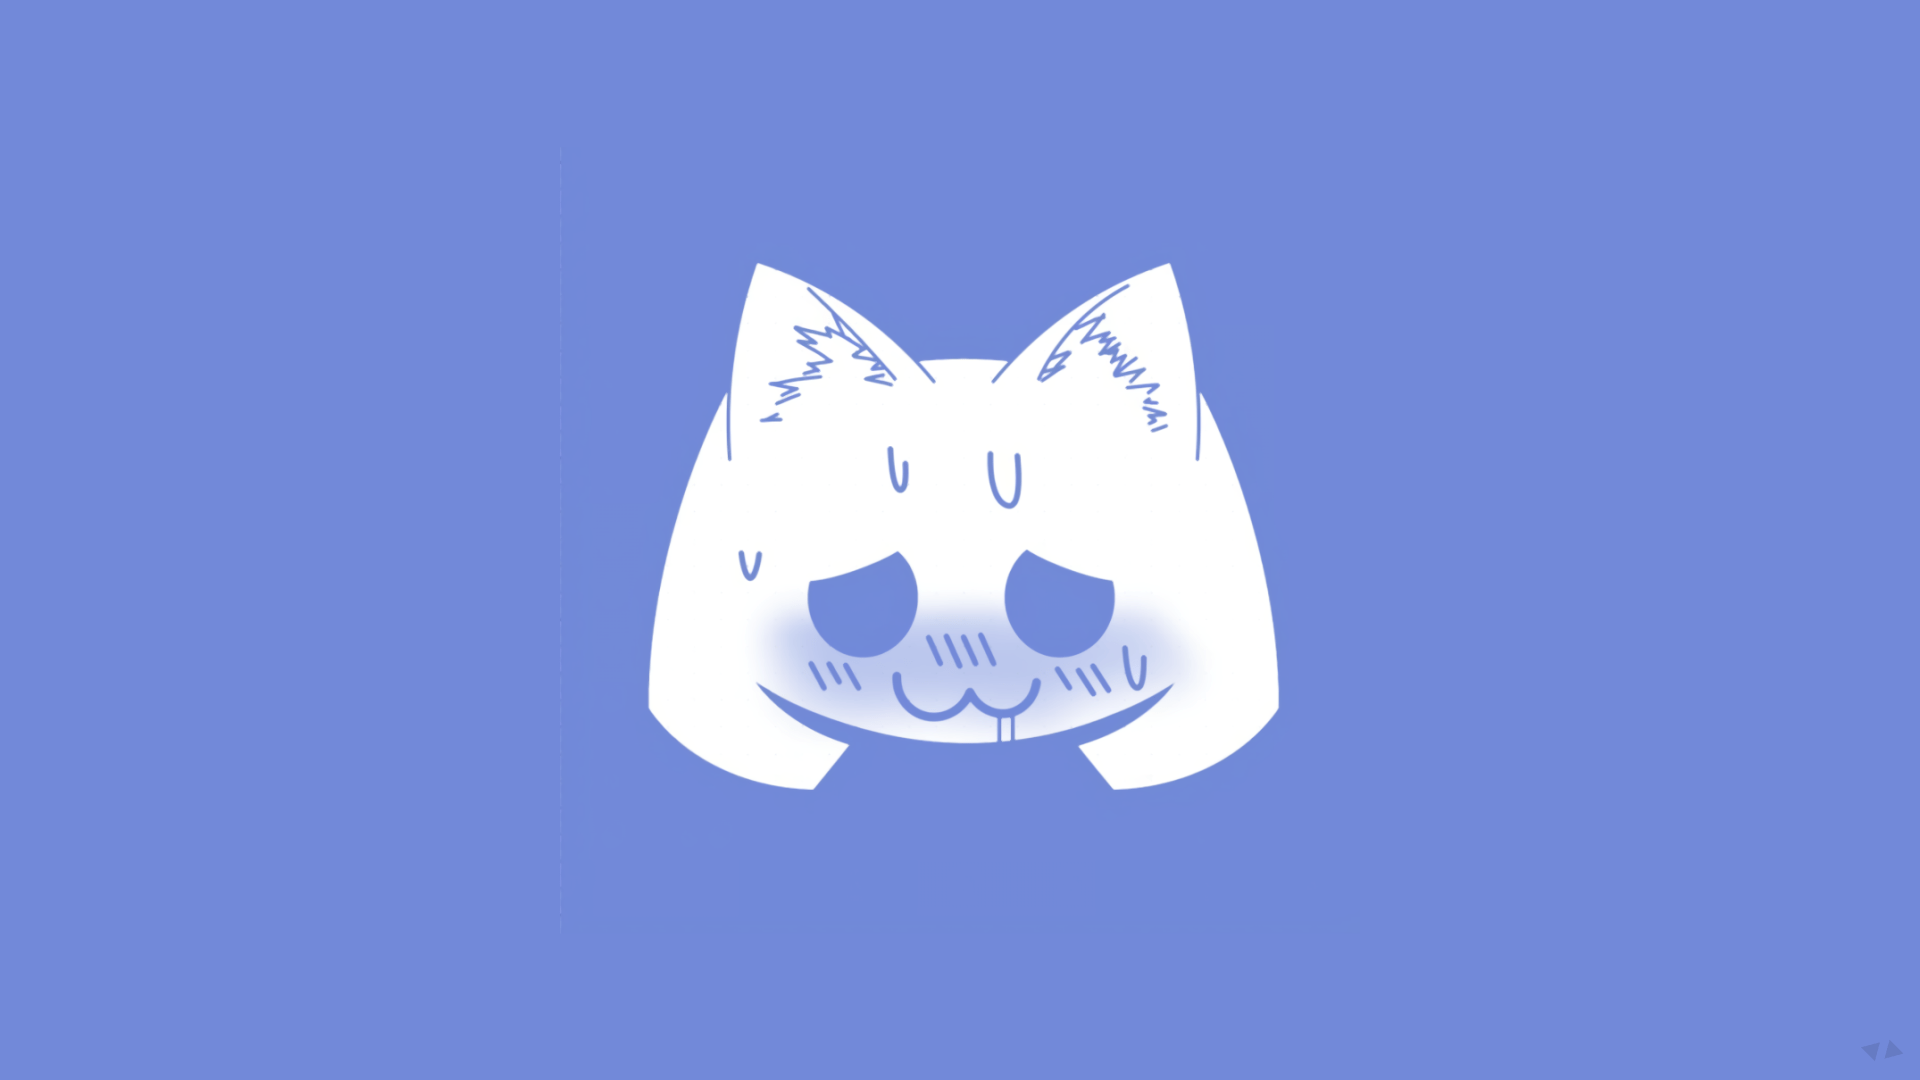 Discord Icon For A Friend  Discord PNG Image  Transparent PNG Free  Download on SeekPNG